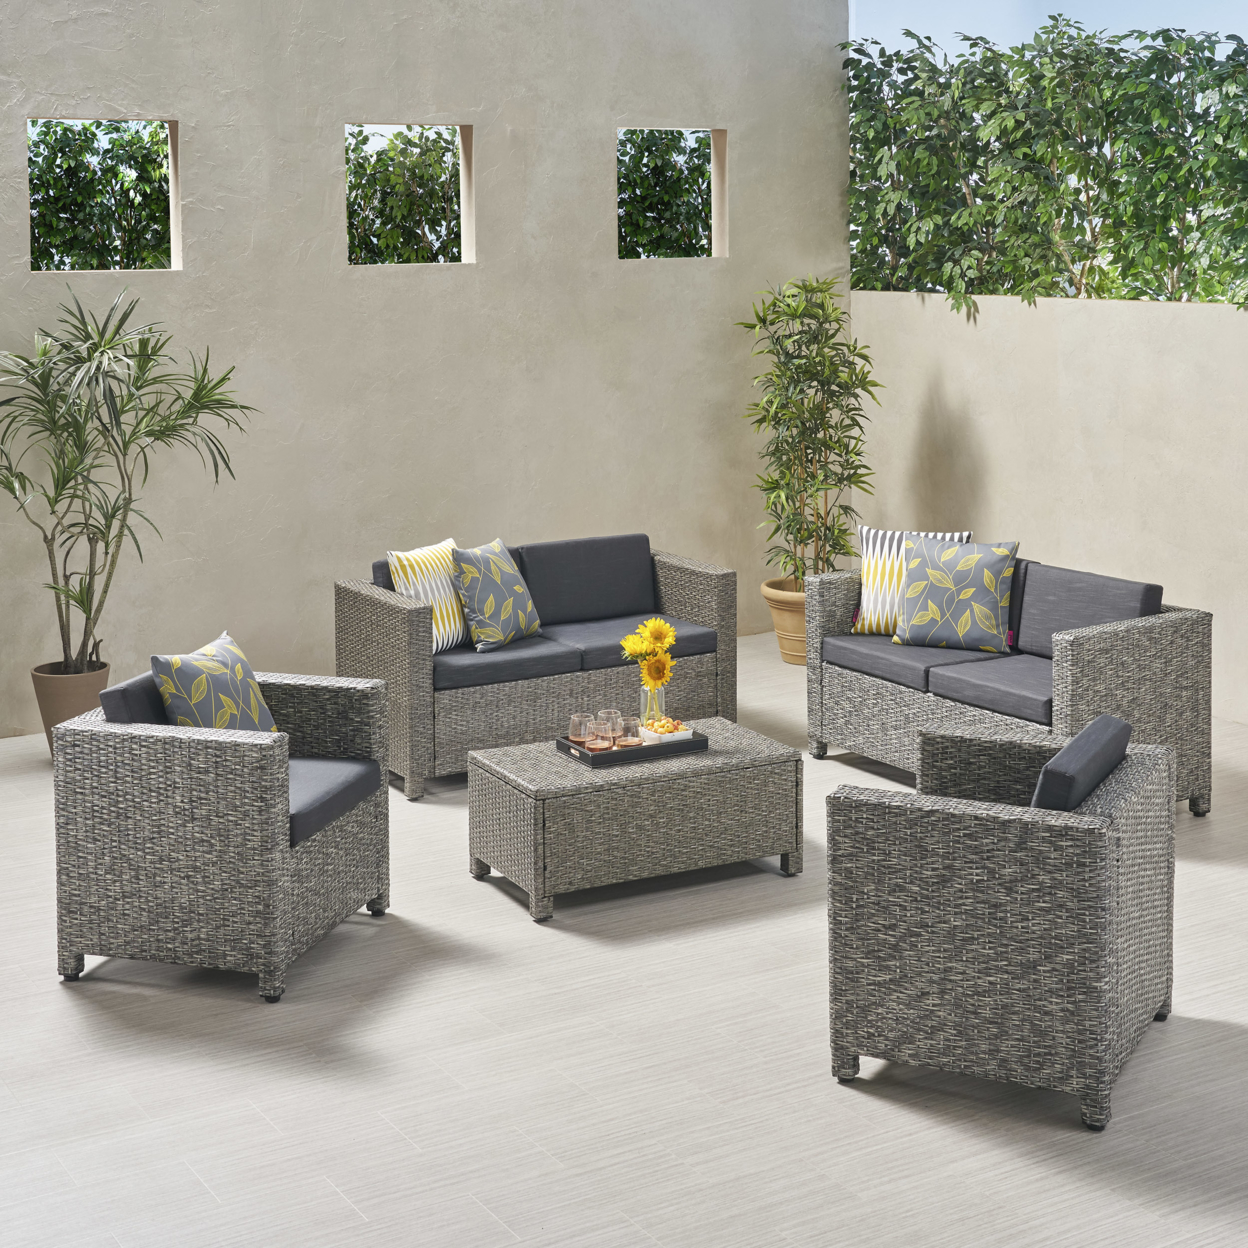 Doreen Outdoor 6 Seater Loveseat Chat Set With Cushions - Mix Black + Dark Gray